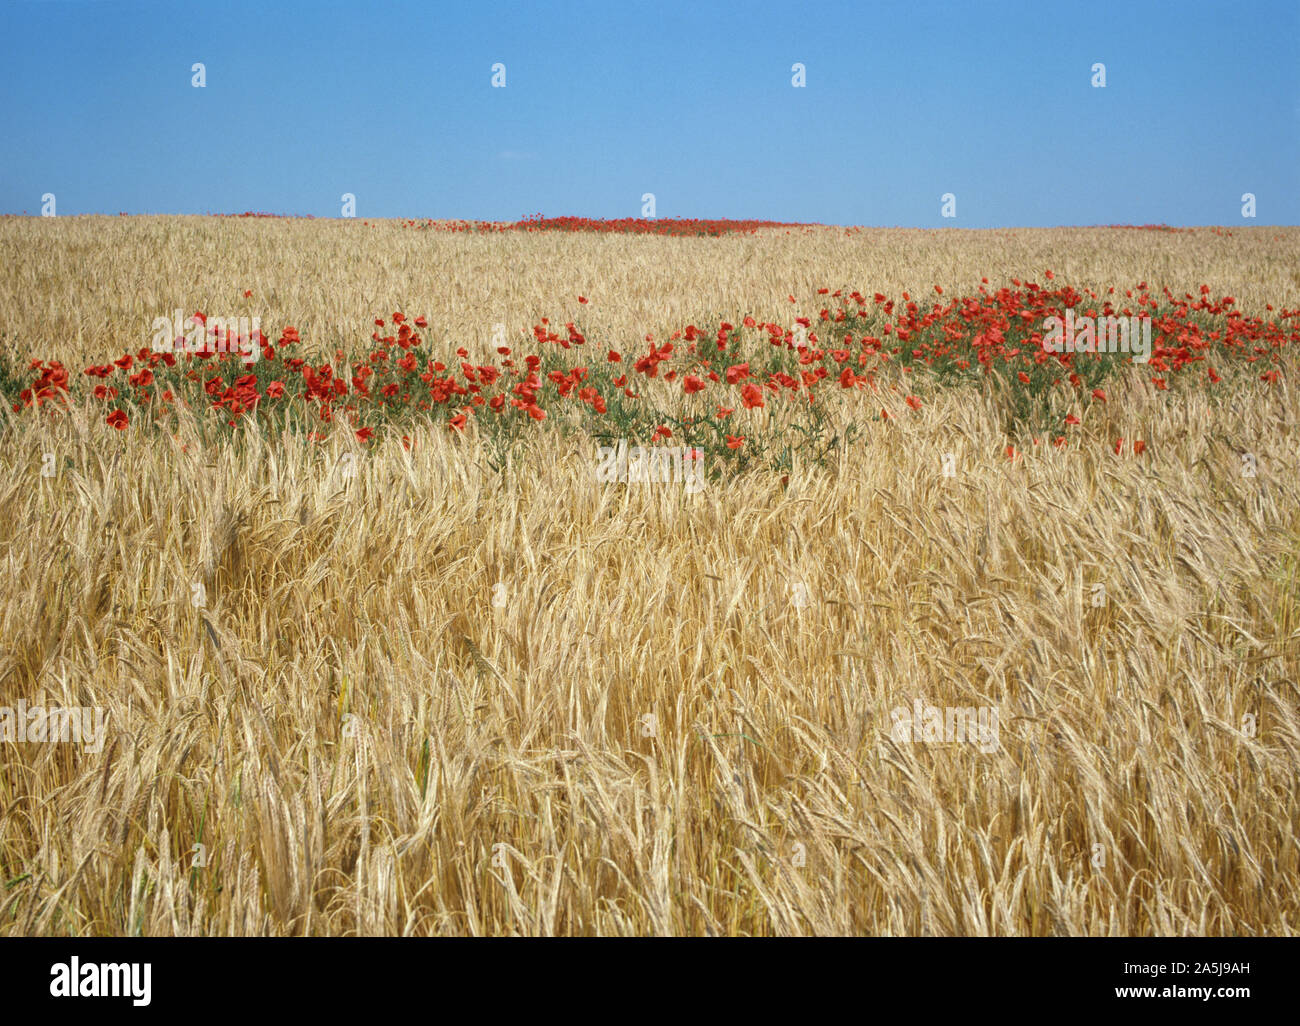 Corn poppies (Papaver rhoeas) red flowers, a strip missed by the sprayer, in a field of golden barley at harvest time Stock Photo